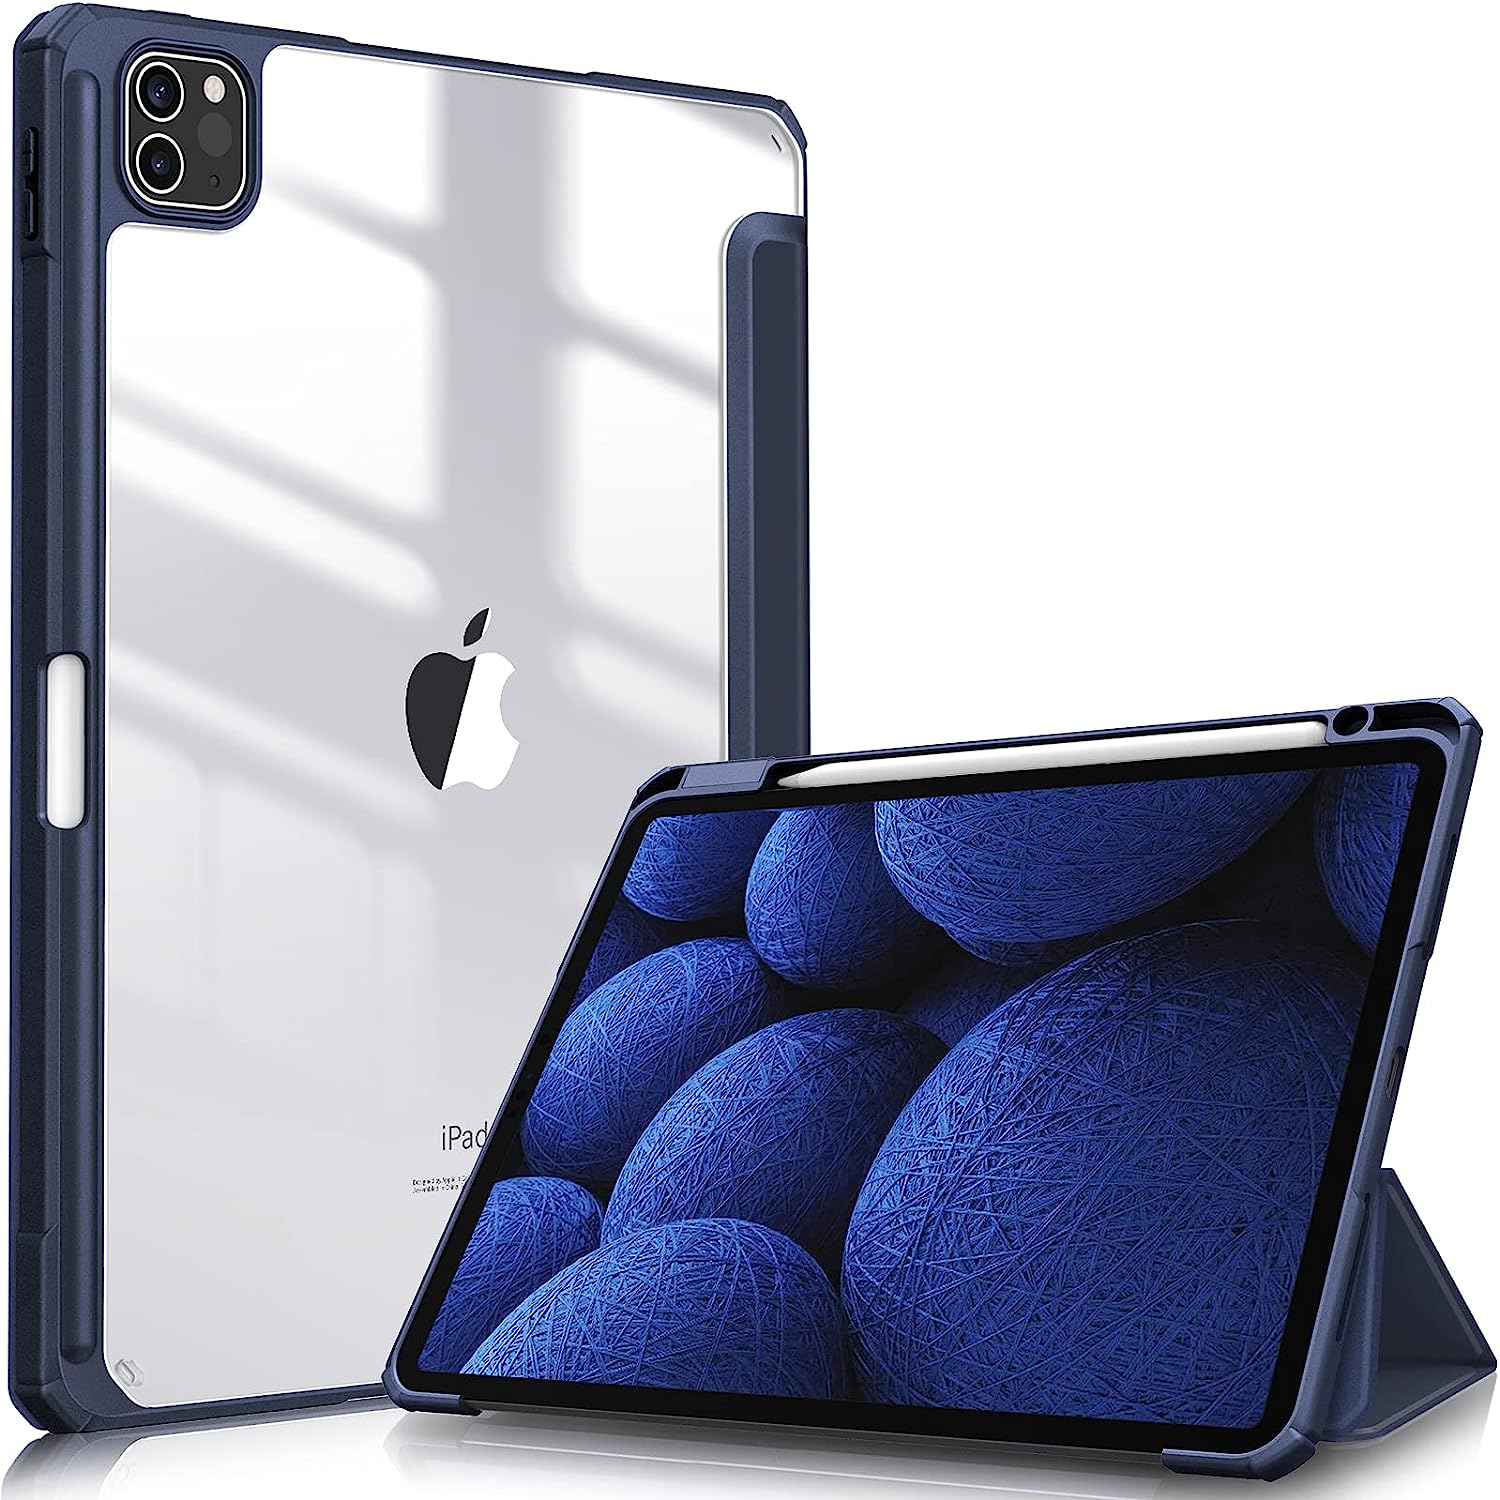 FINTIE Hybrid Case Compatible with iPad Pro 11 Inch (2022/2021/2020/2018, 4th/3rd/2nd/1st Generation) - Ultra Slim Shockproof Clear Cover w/Pencil Holder, Auto Wake/Sleep, Navy